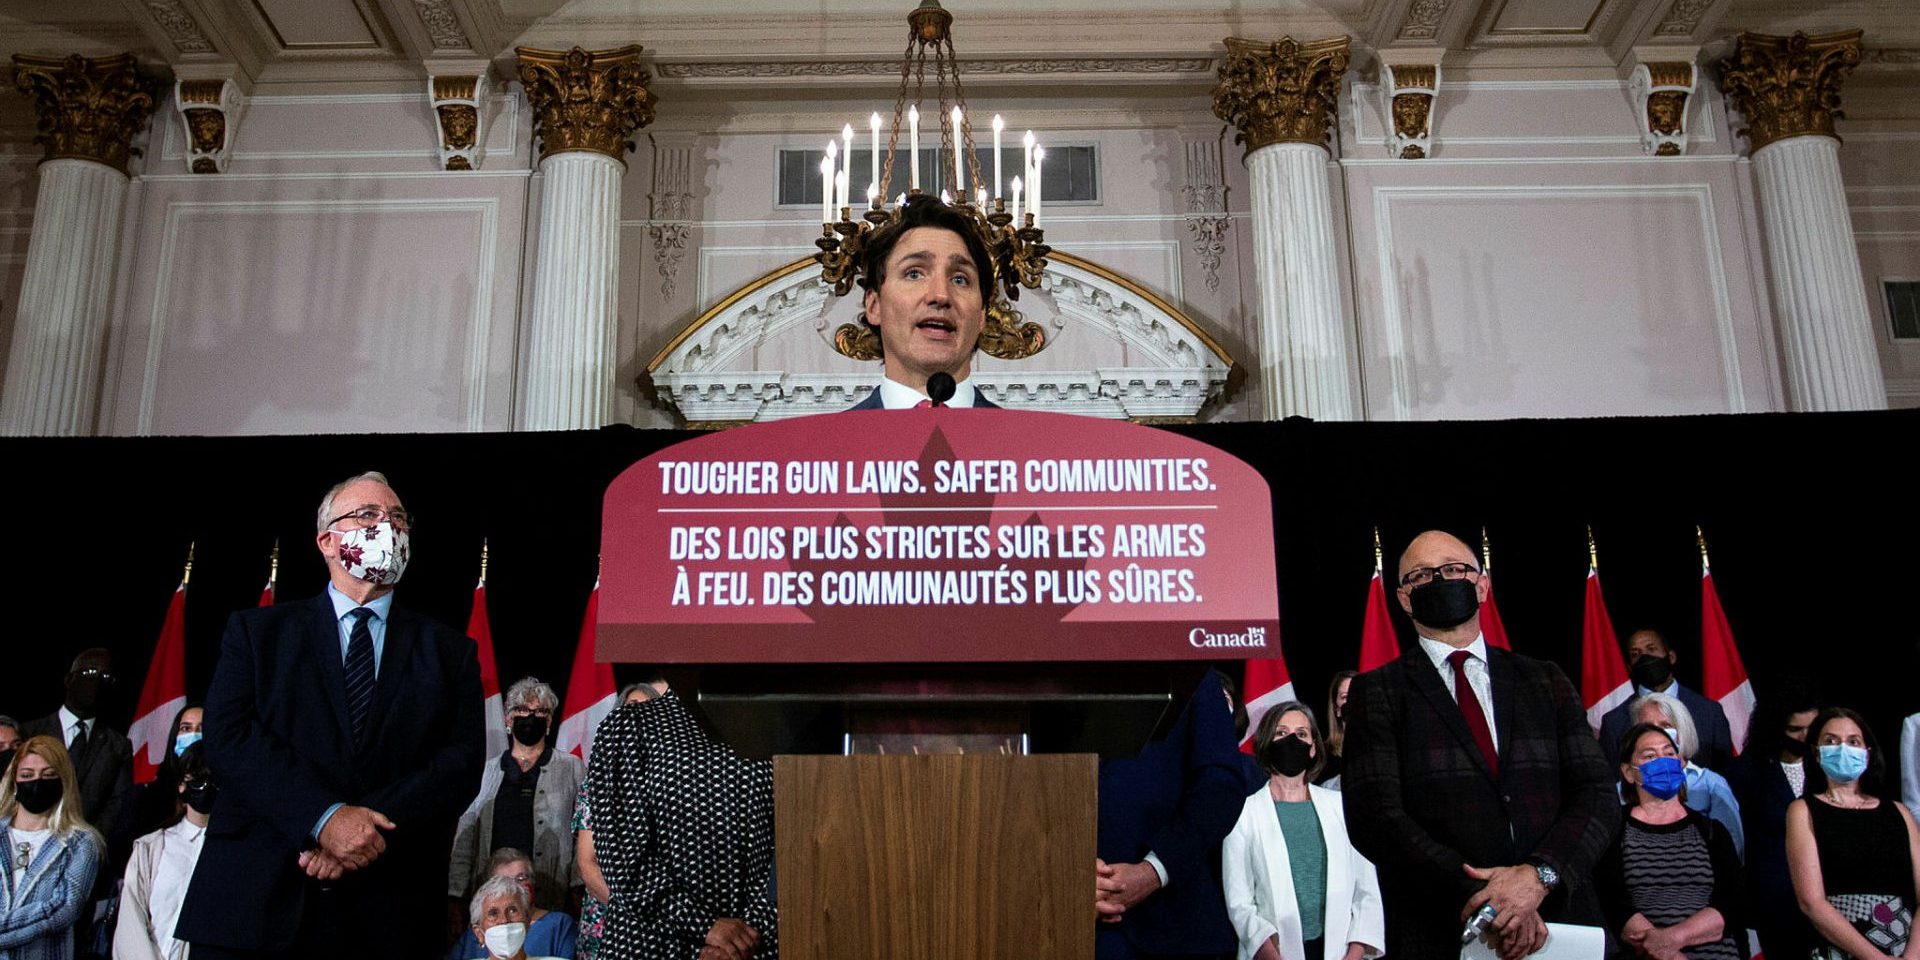 Prime Minister Justin Trudeau holds a press conference at the Chateau Laurier on May 30, 2022, to announce a ban on the sale, trade and import of handguns in Canada. Andrew Meade